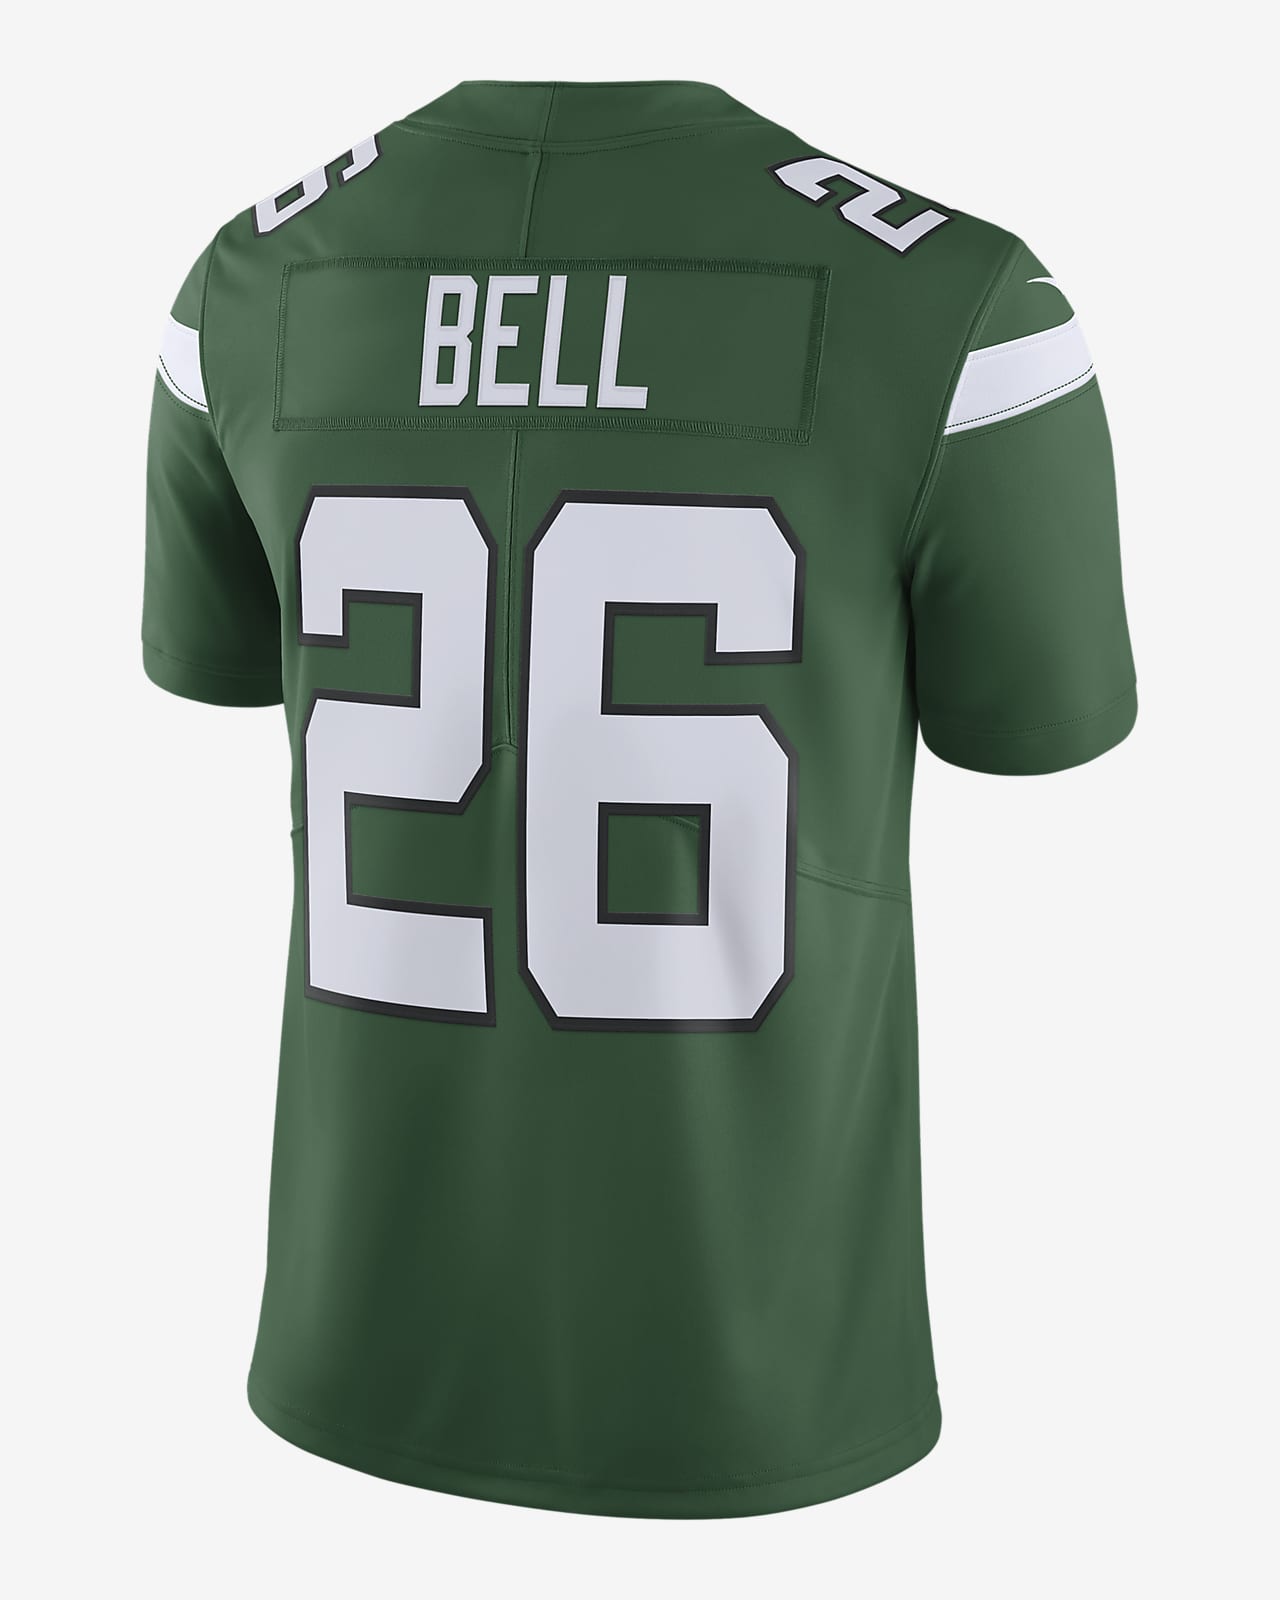 bell jets jersey